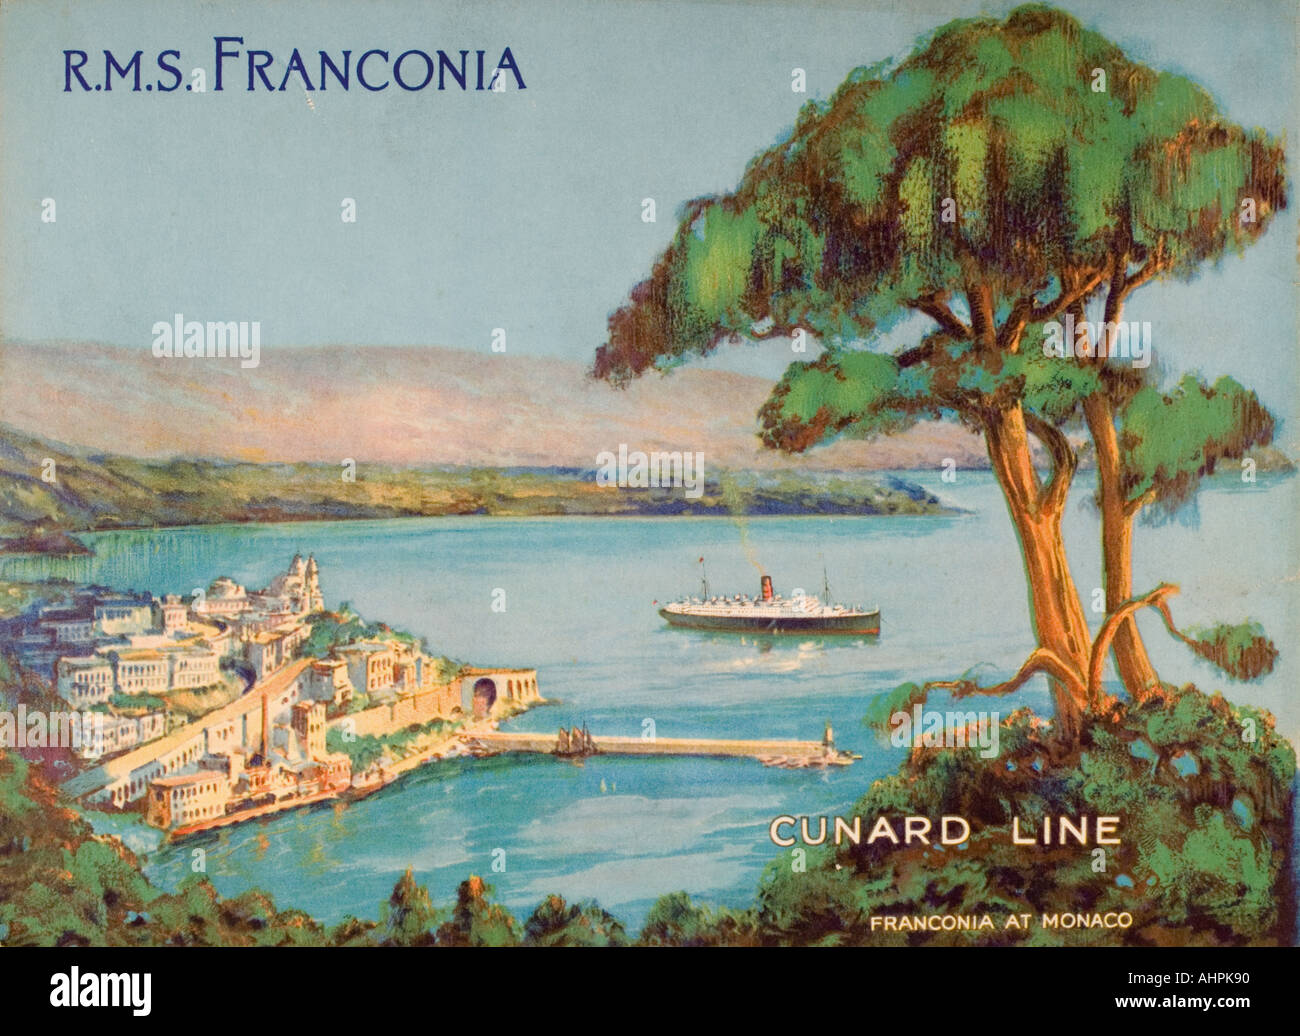 Cunard Line promotional brochure for the RMS Franconia circa 1926 - 1930. Stock Photo